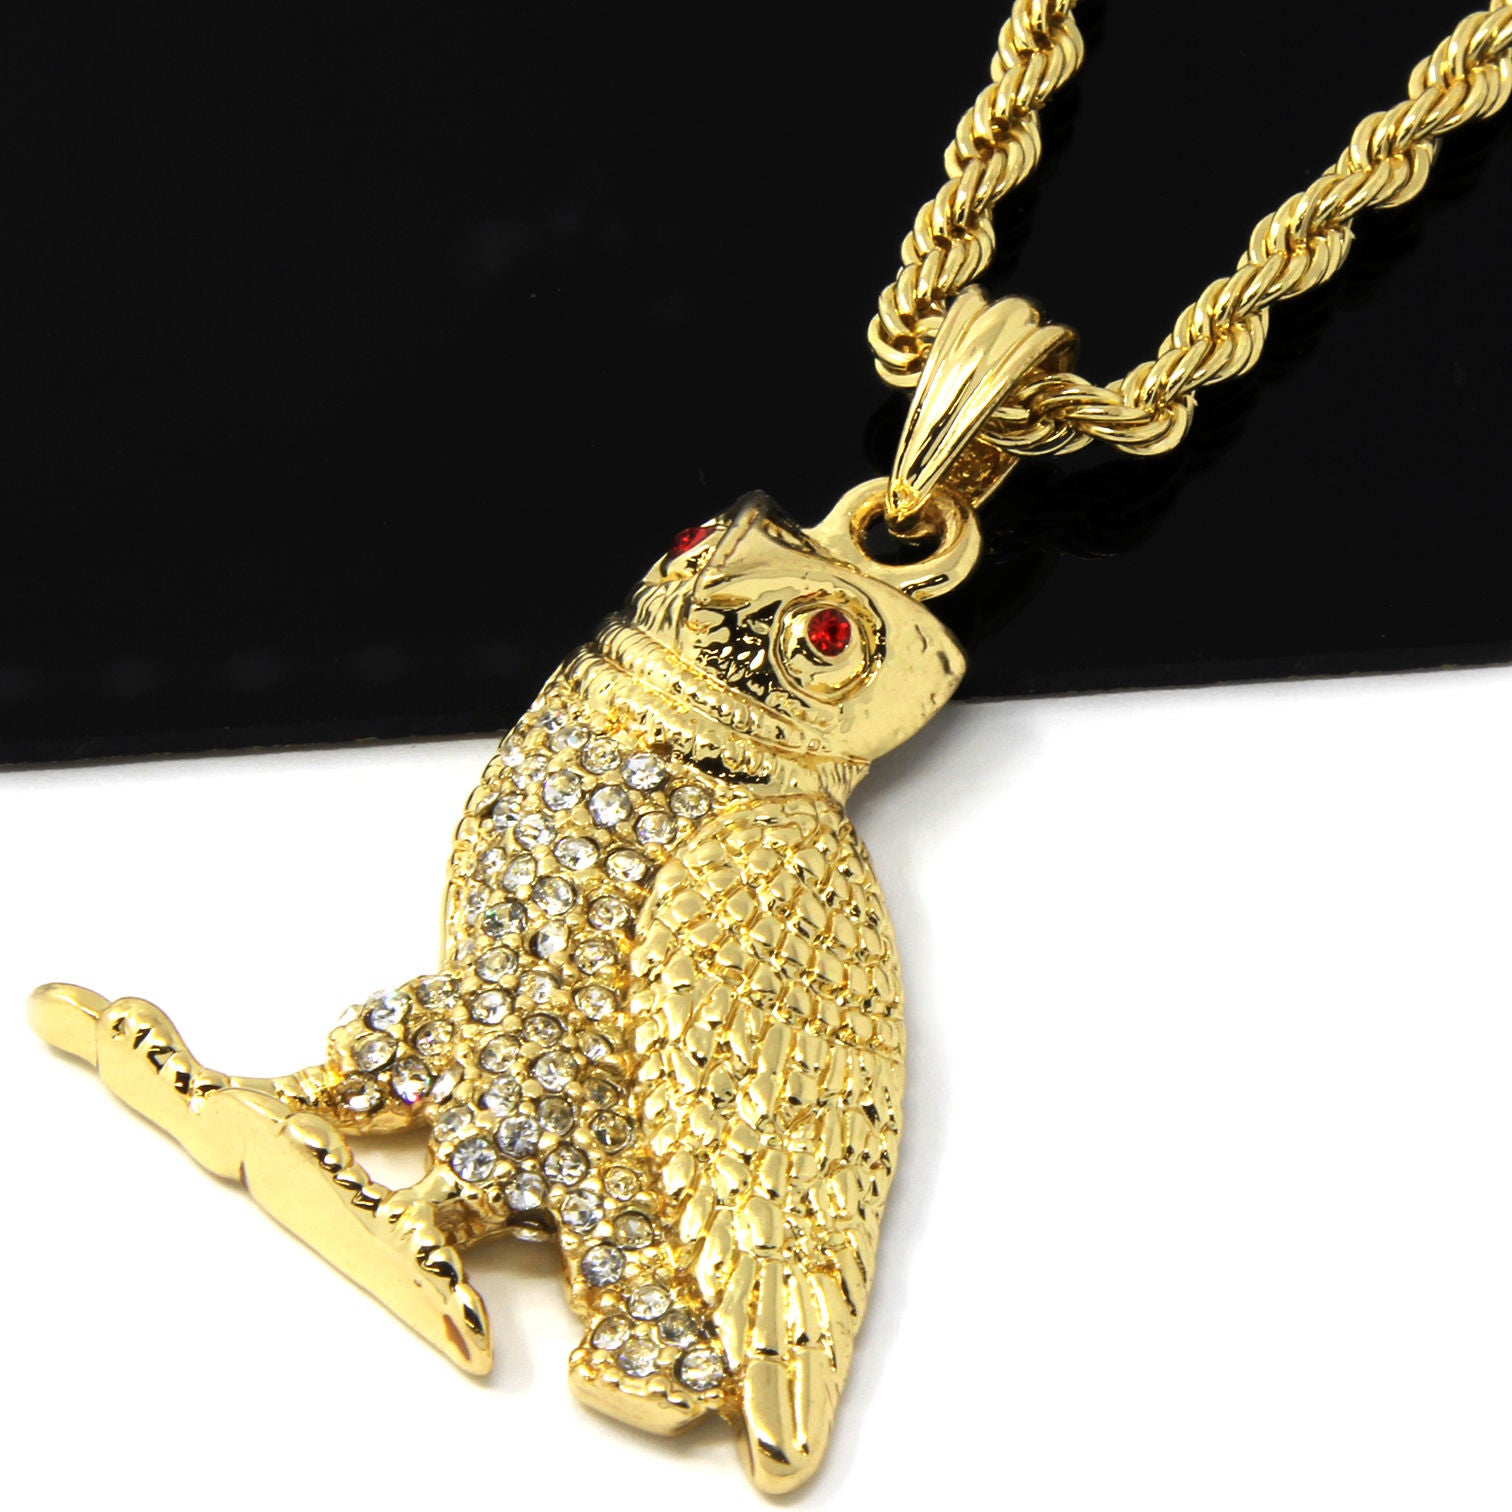 OWL PENDANT RED EYE WITH GOLD ROPE CHAIN